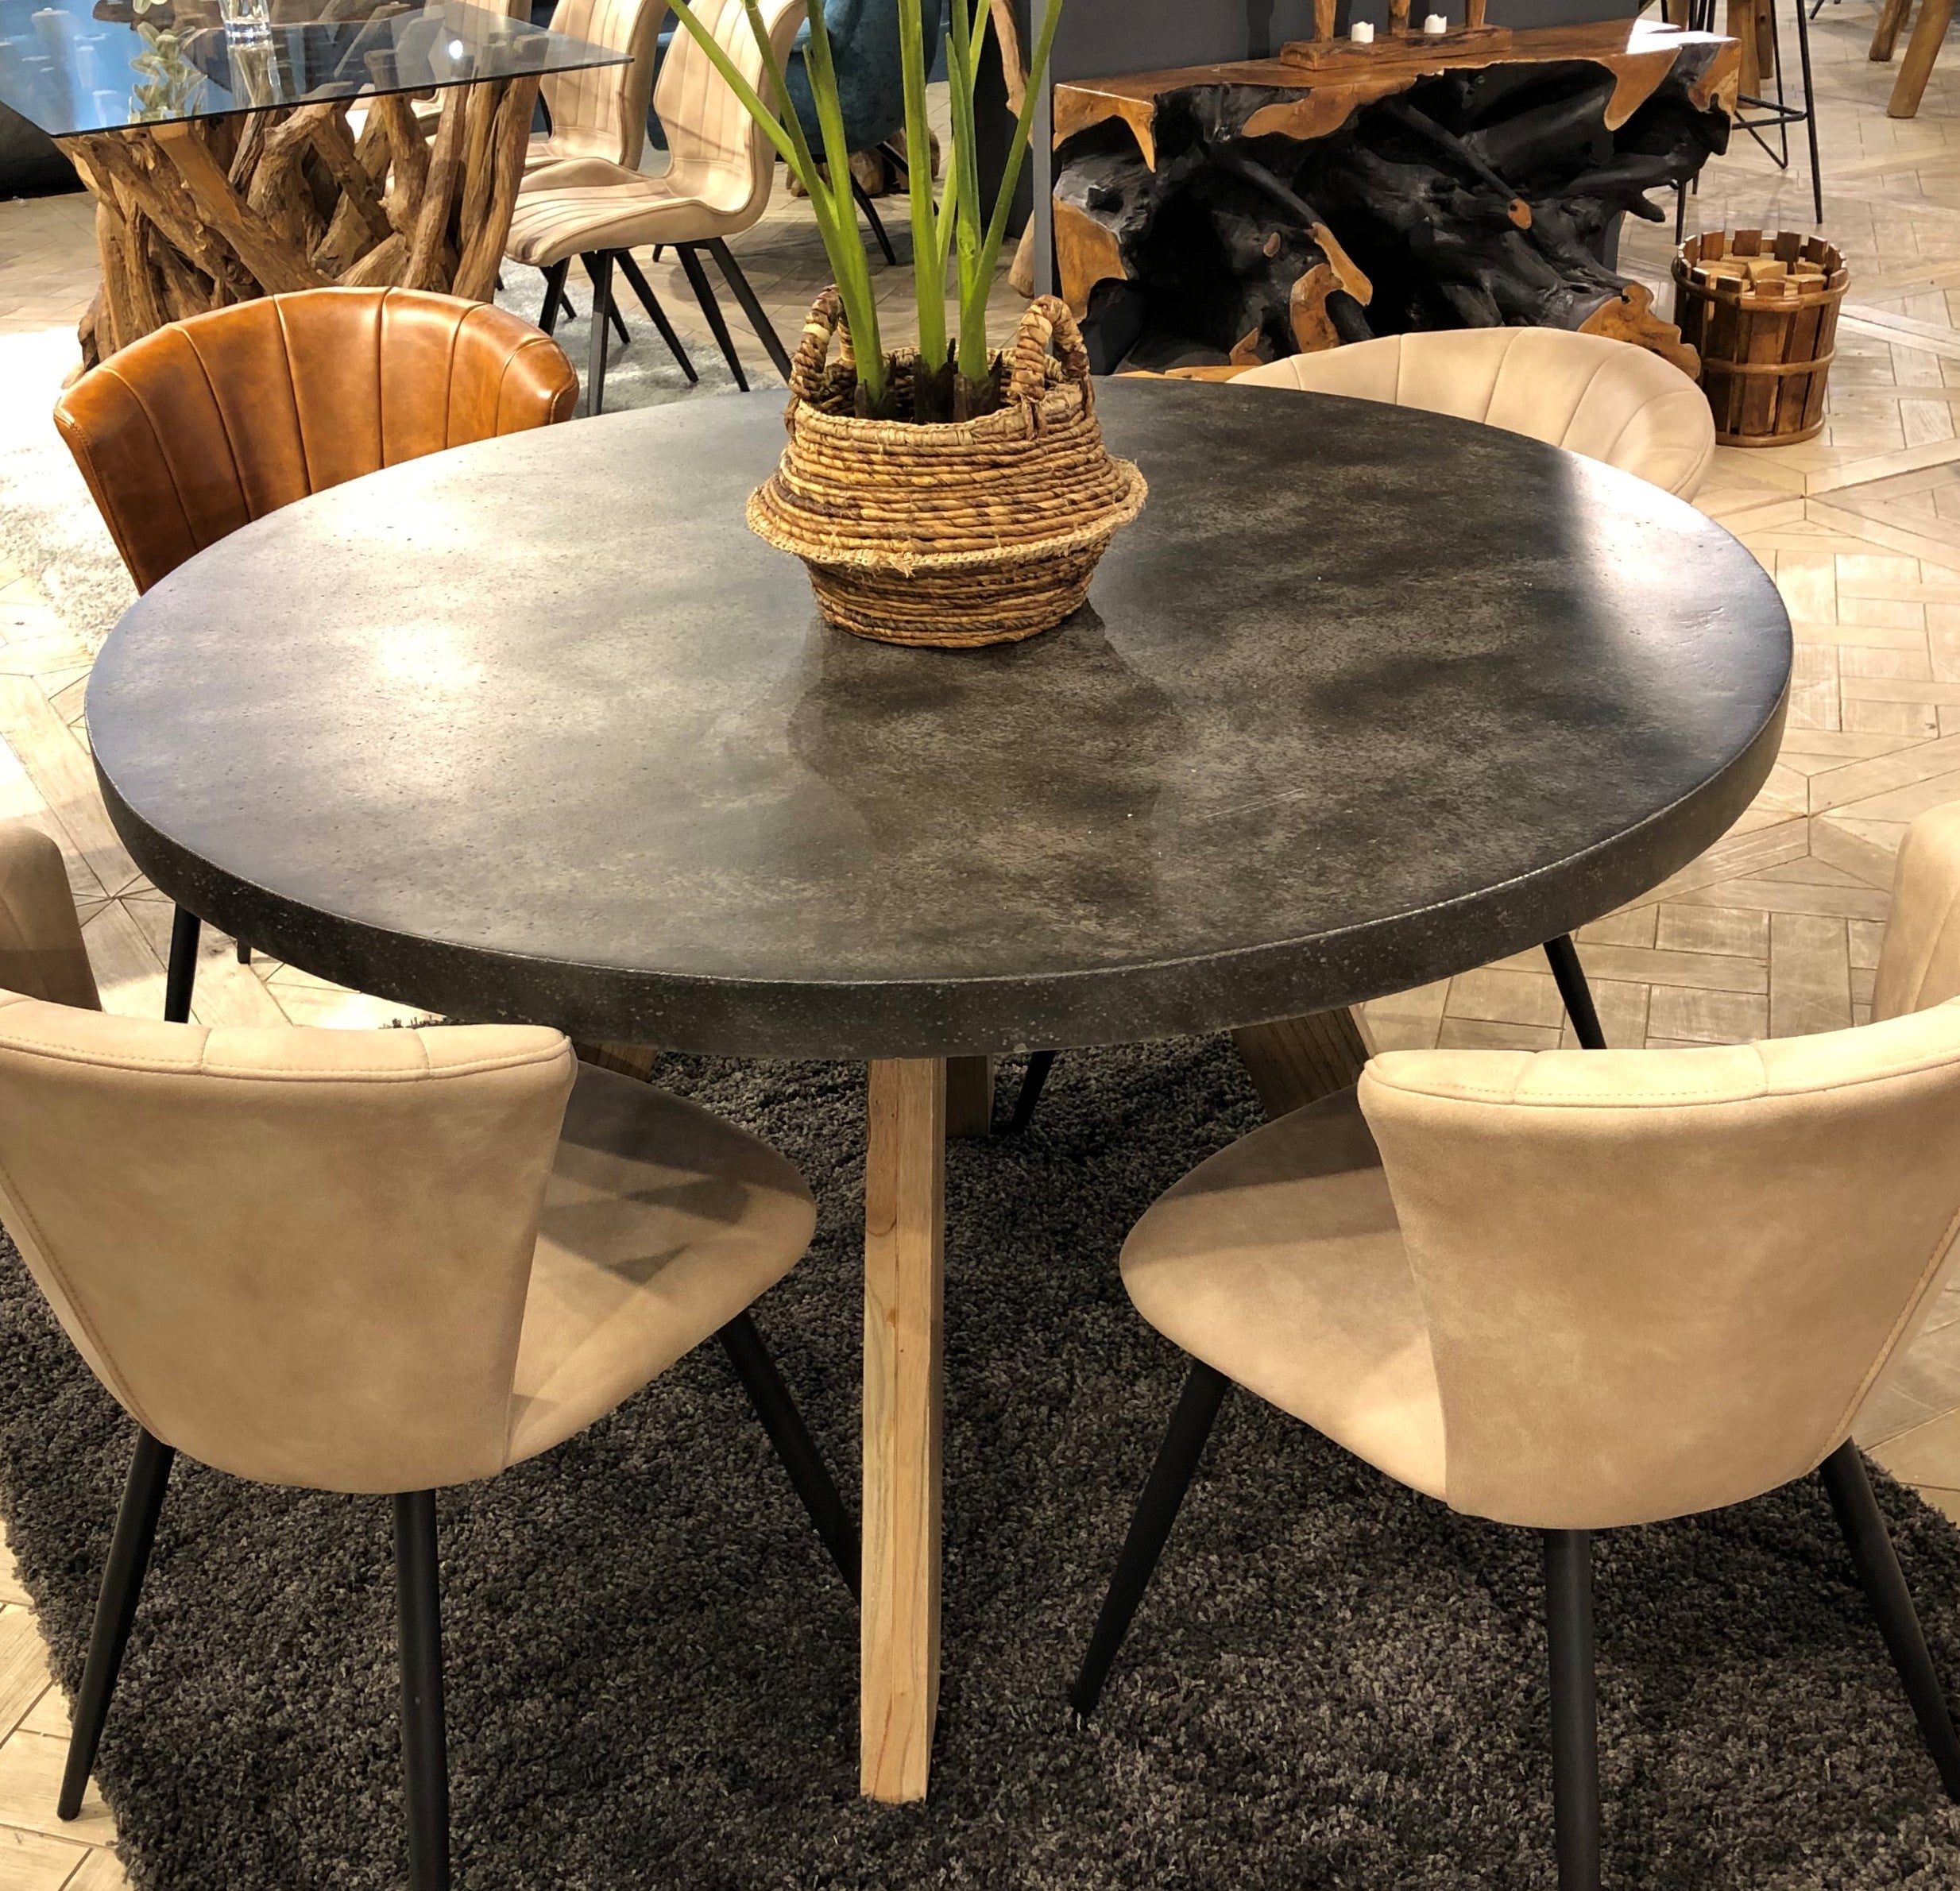 Aspect Round Dining Table